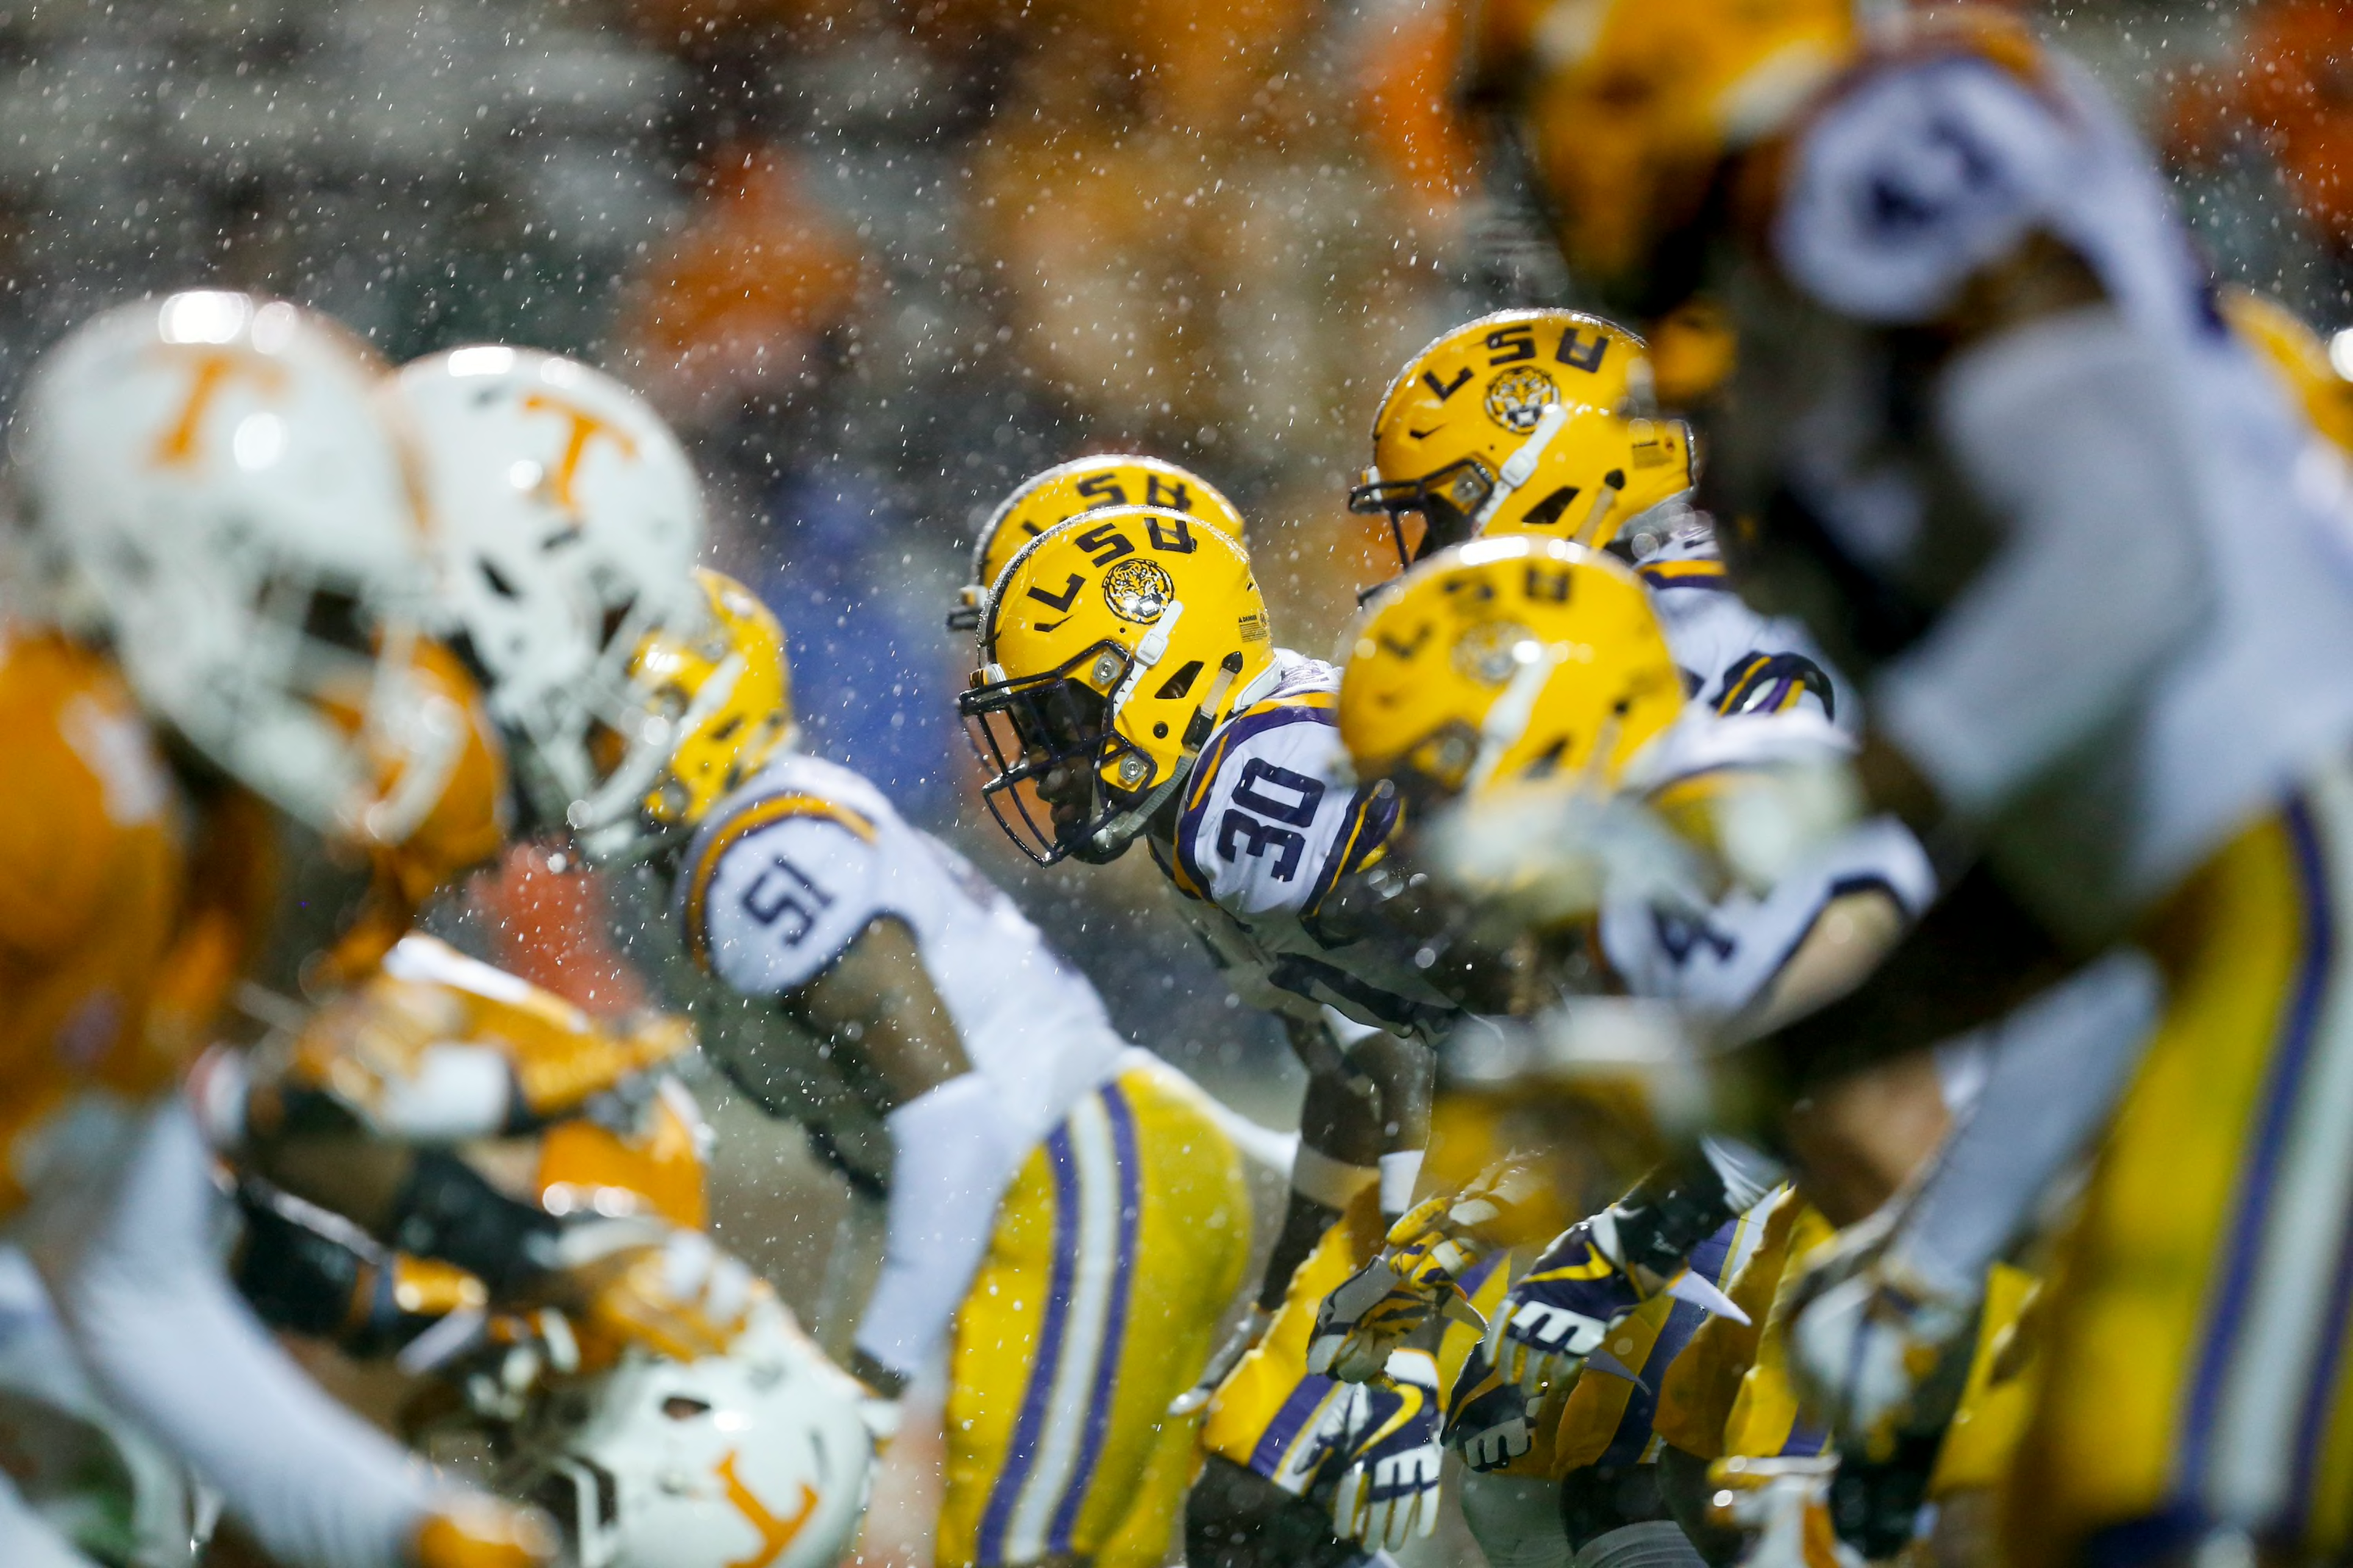 Tennessee and LSU lines up in the rain in their game in 2017